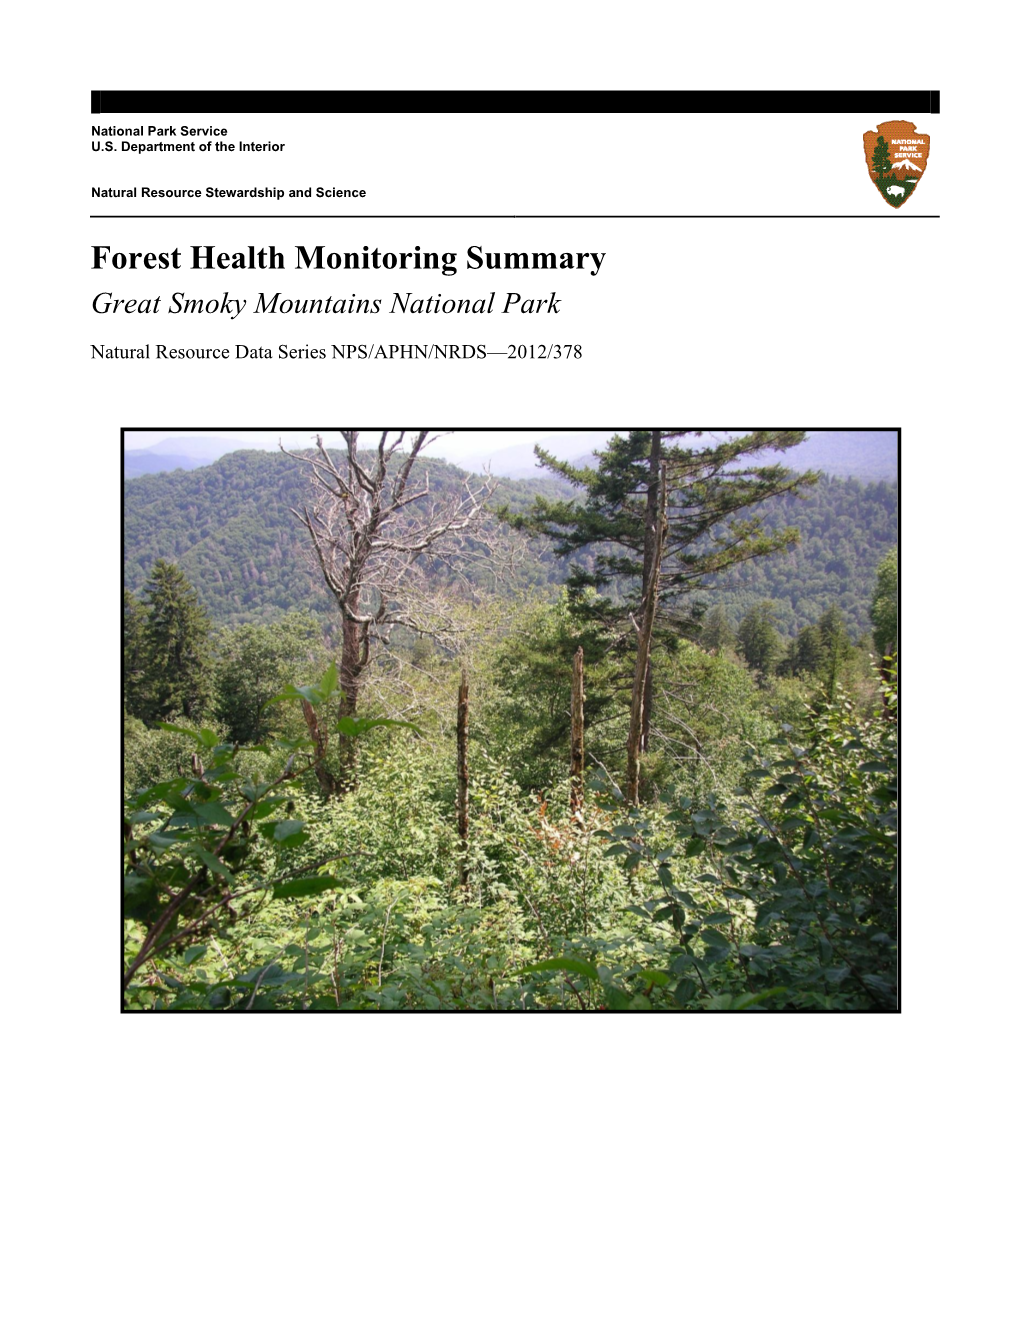 Forest Health Monitoring Summary, Great Smoky Mountains National Park